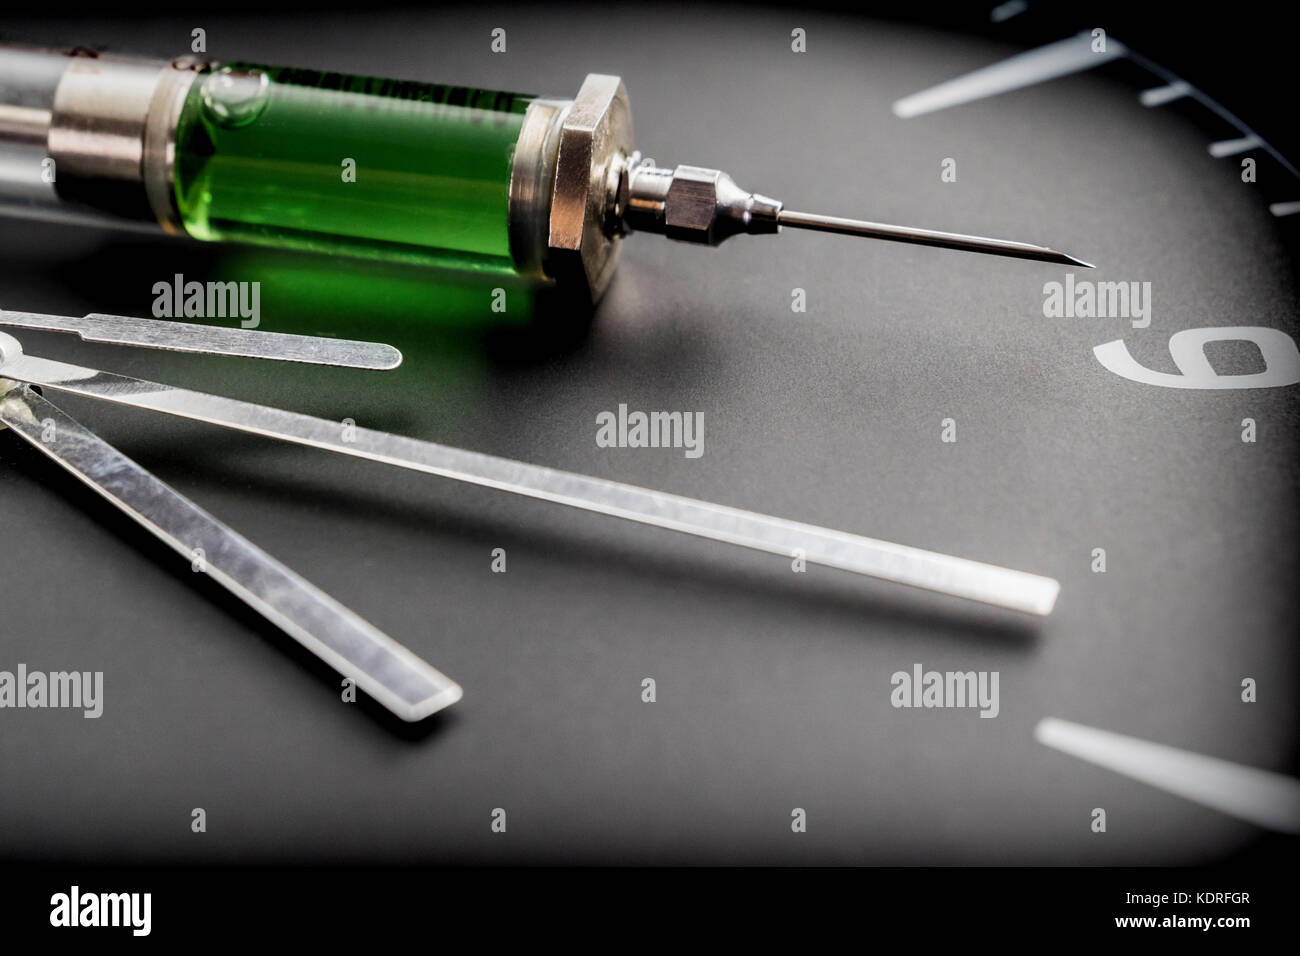 A syringe on a clock in laboratory, conceptual image Stock Photo